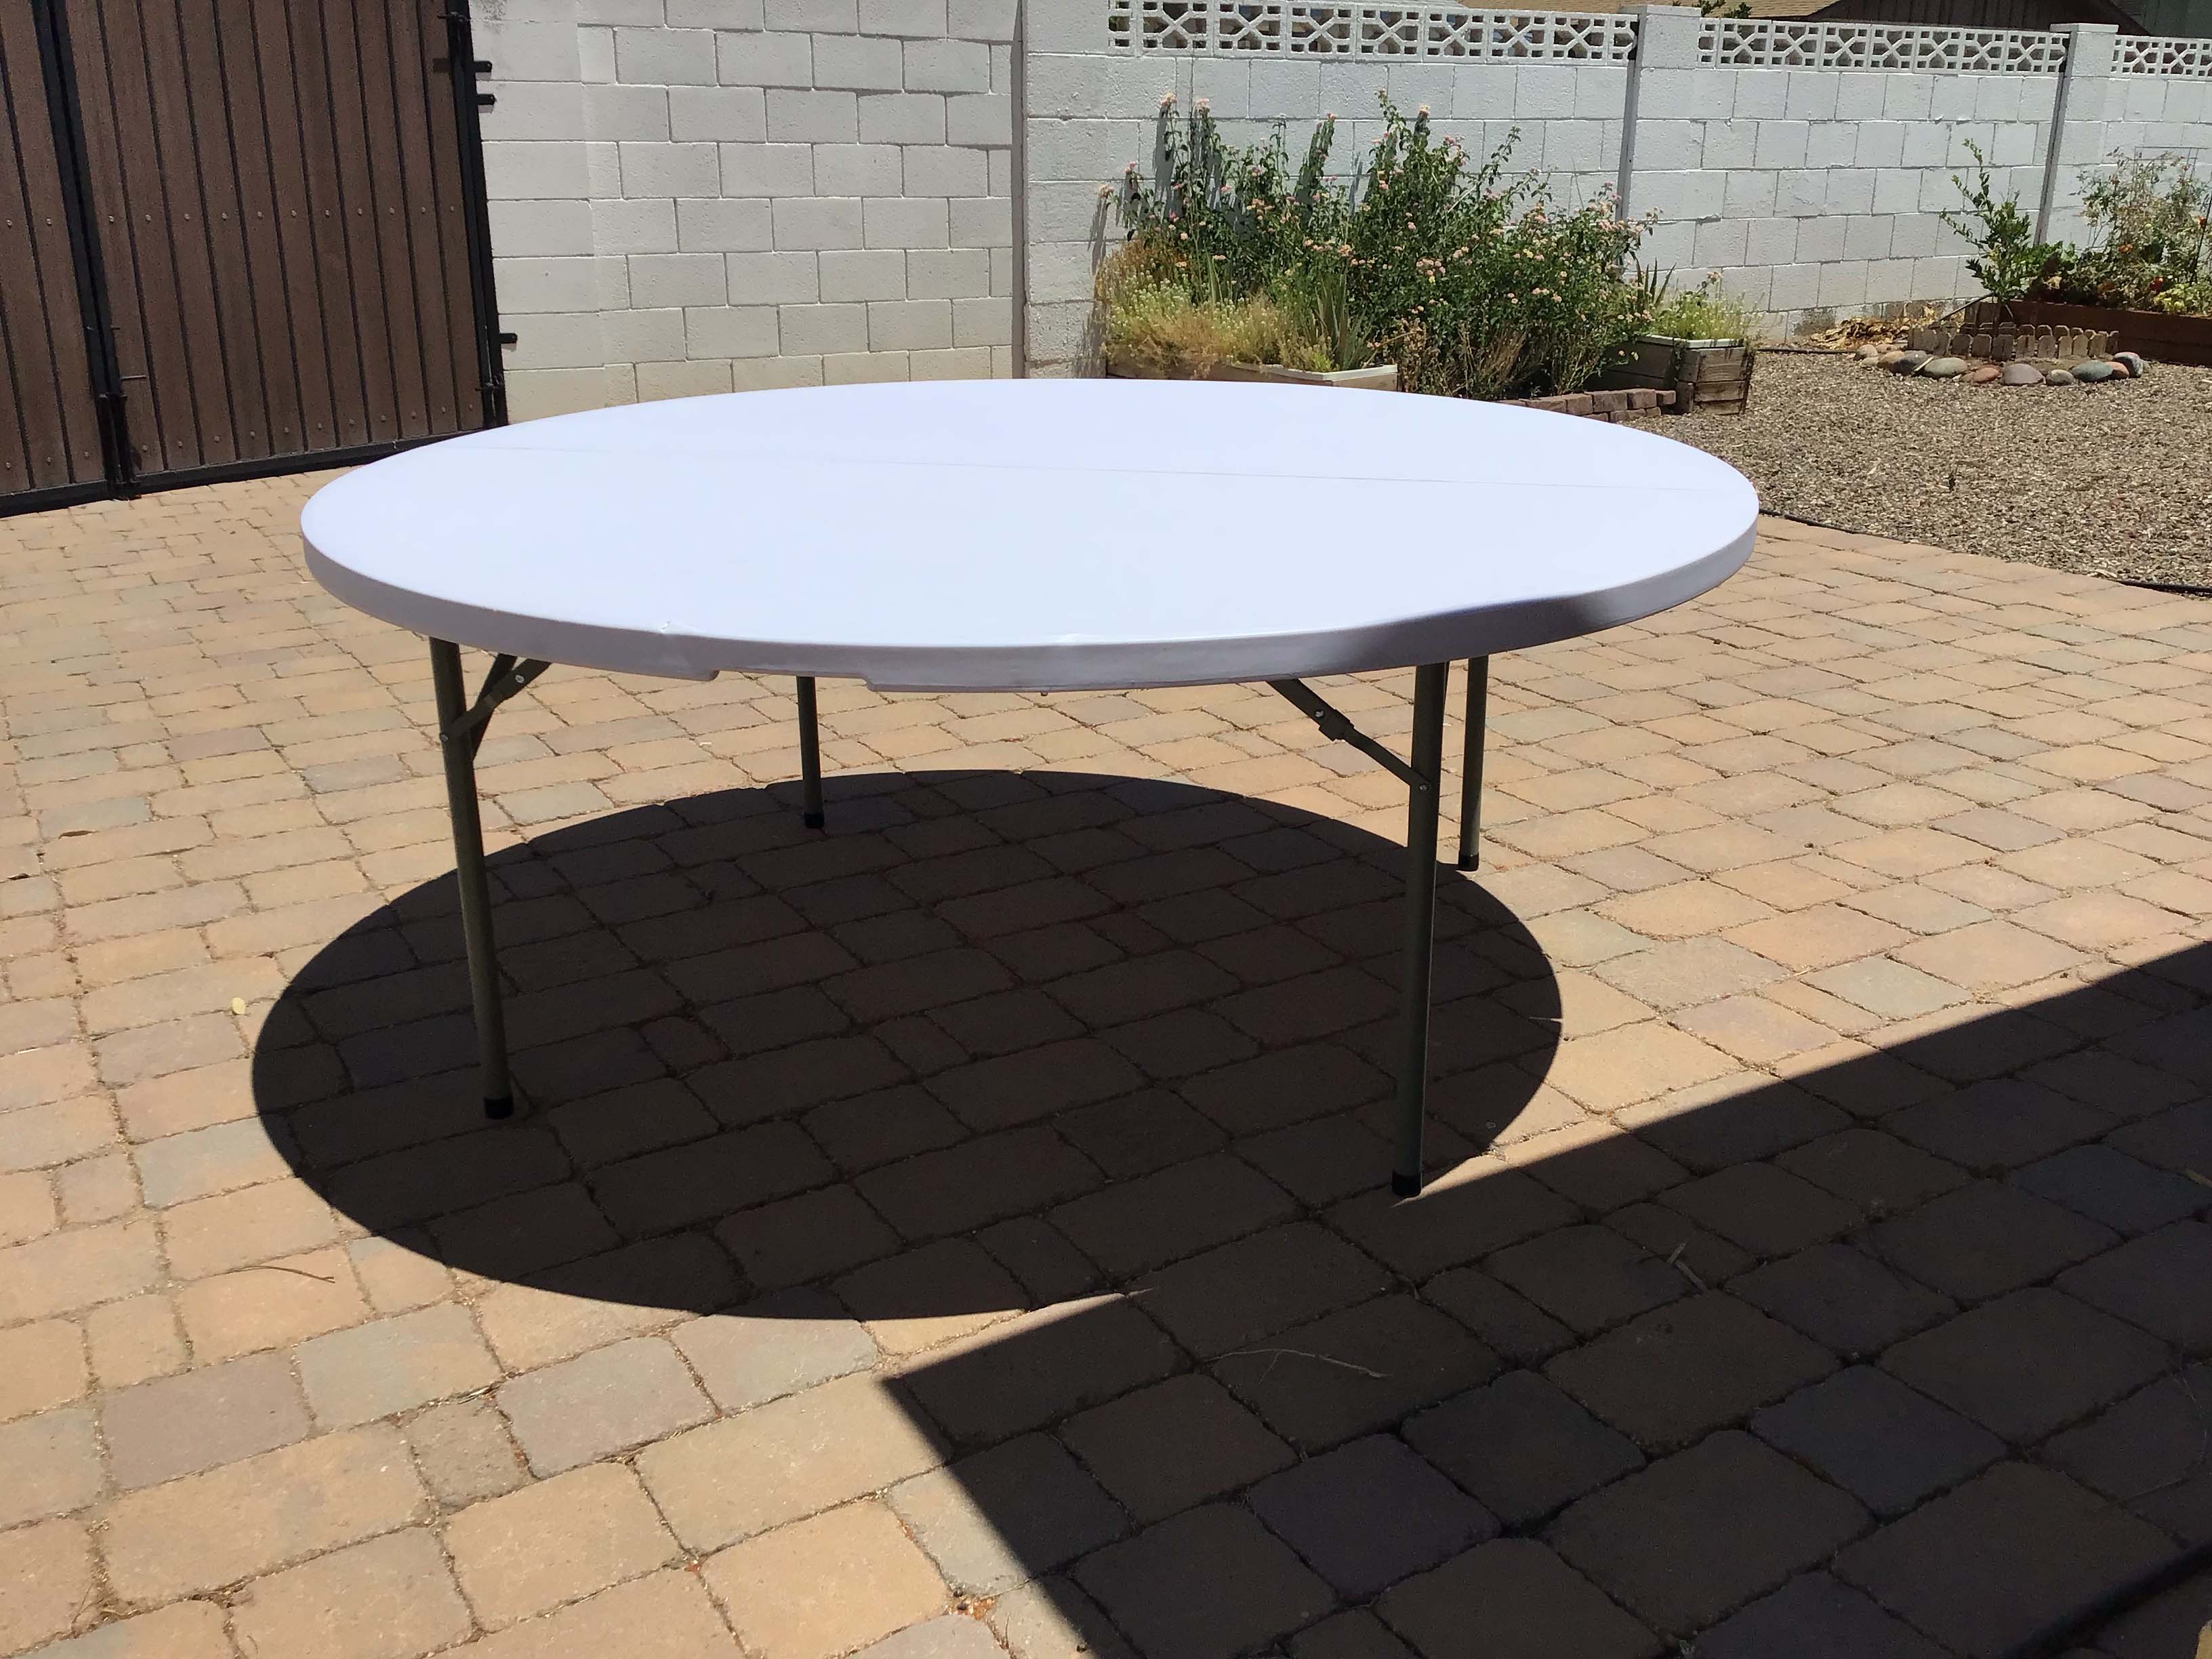 6 foot round tables